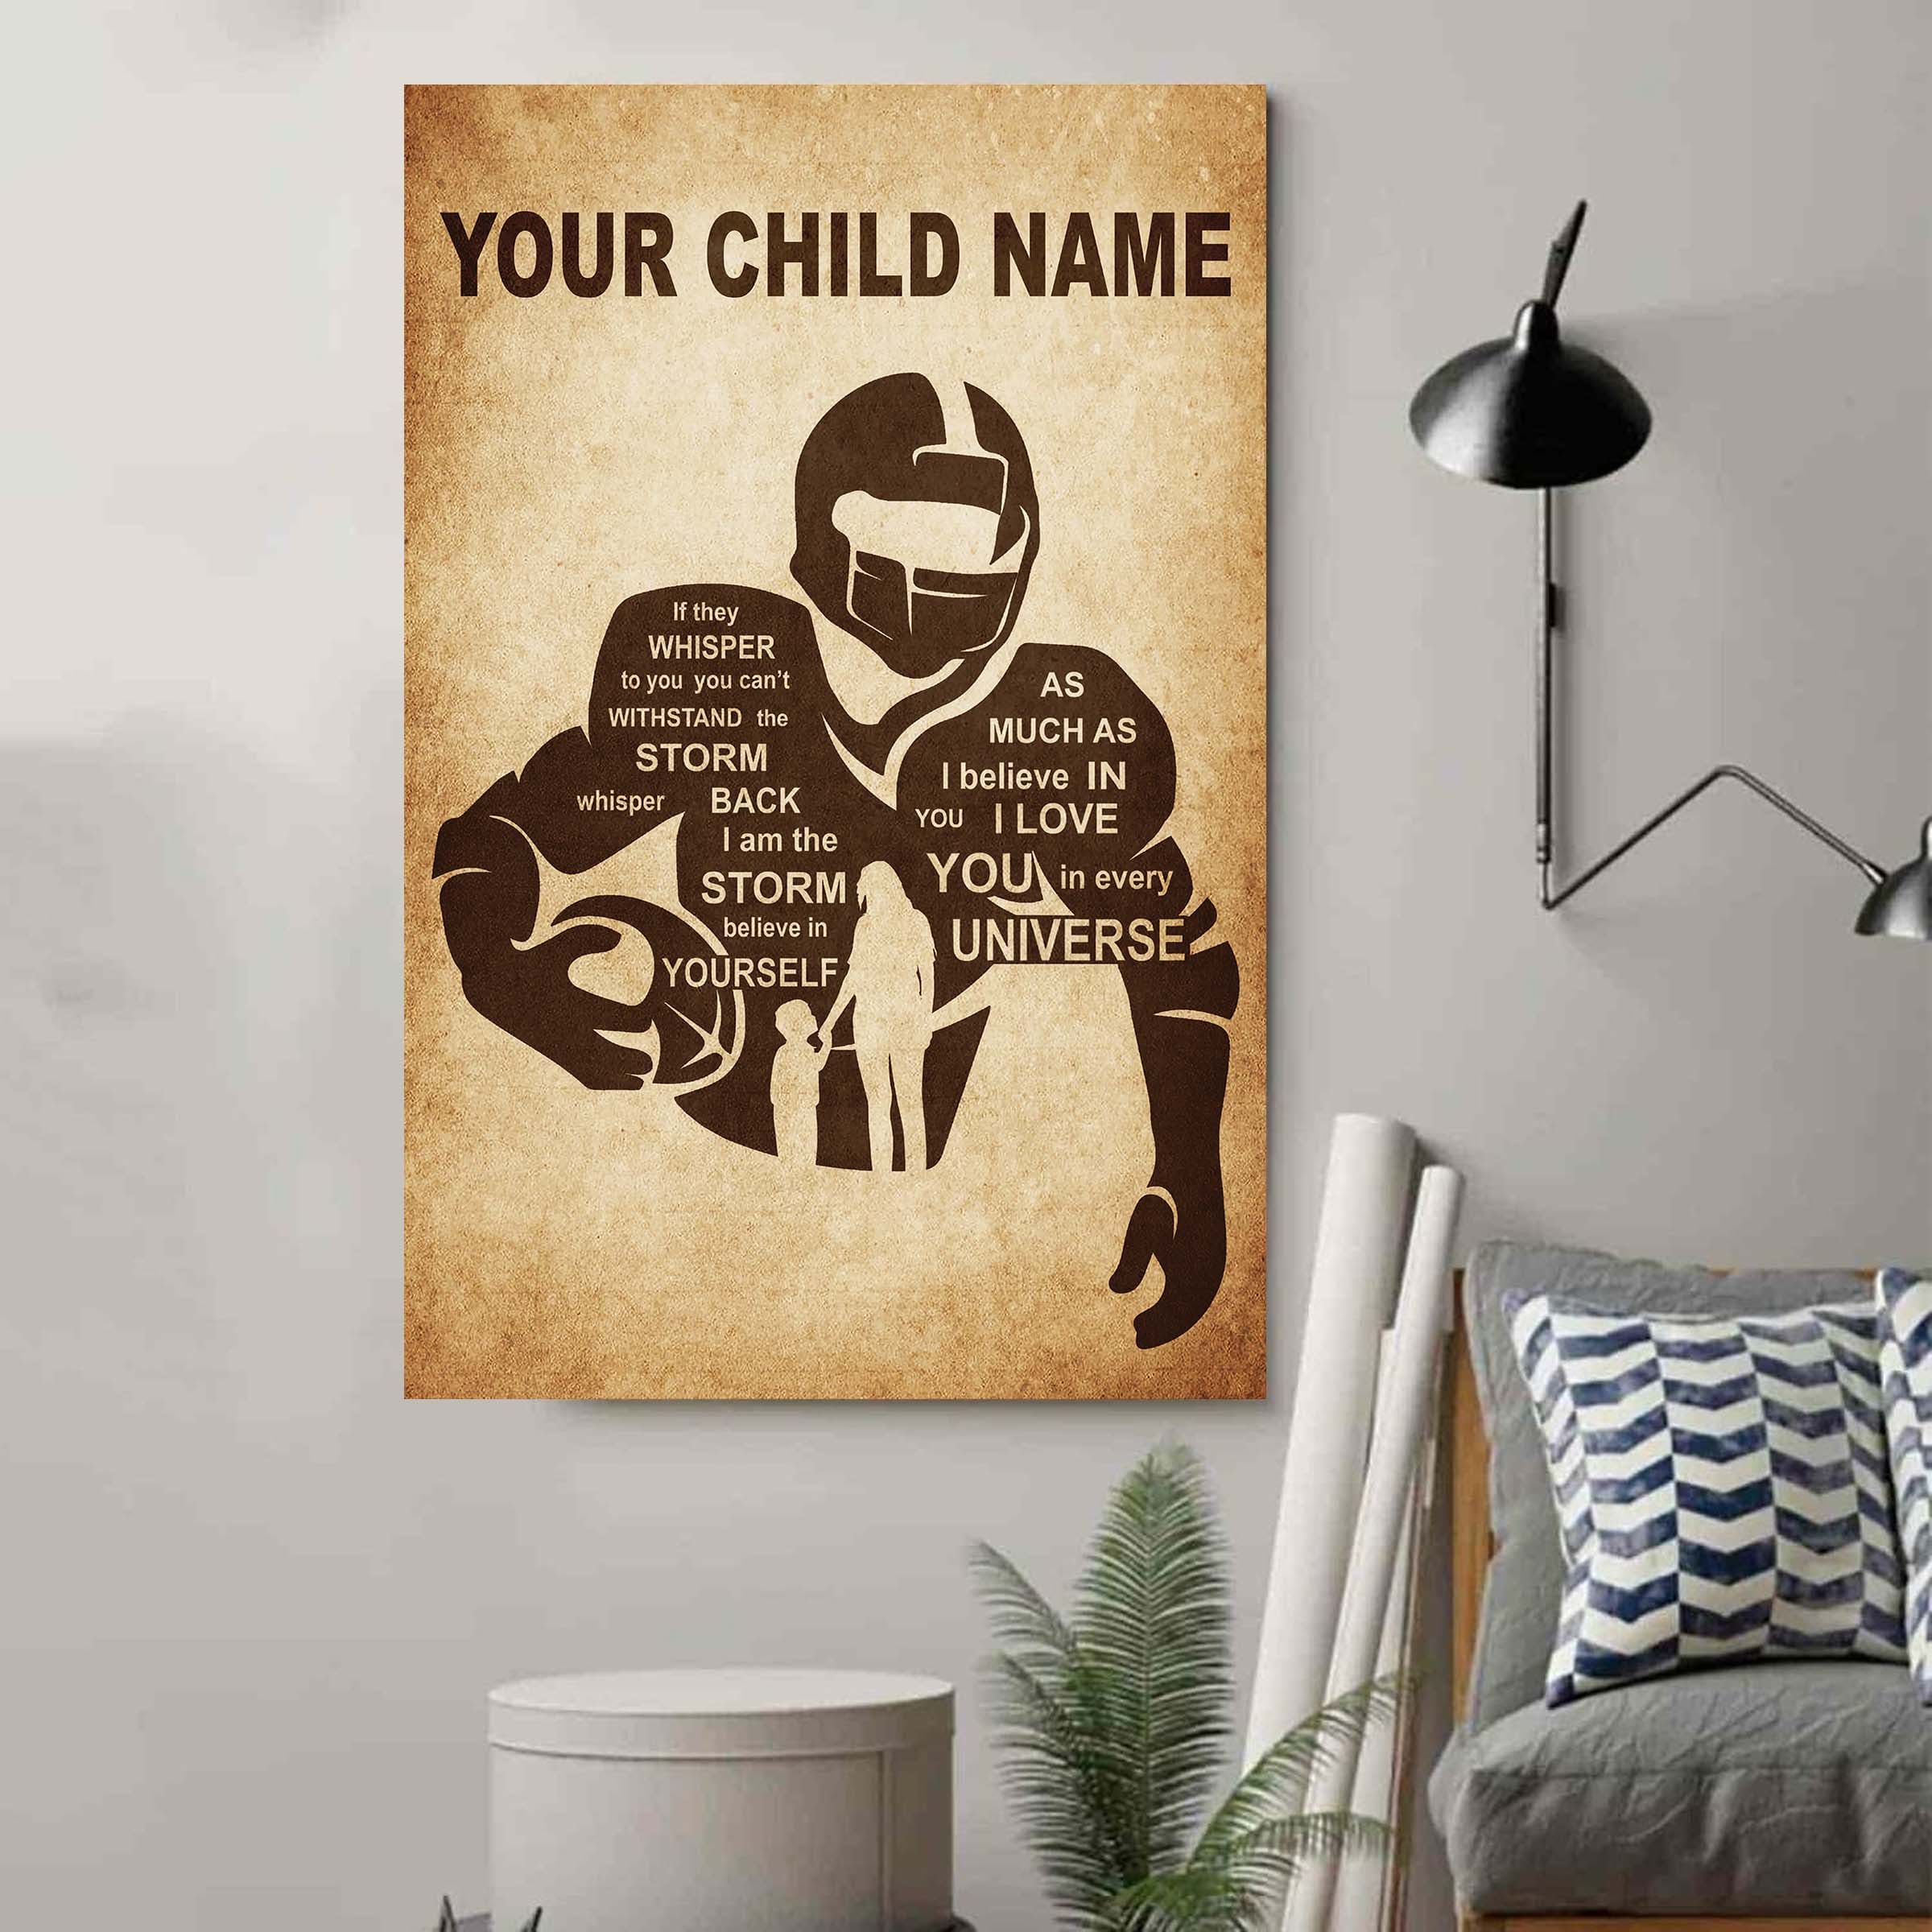 Personalized Your Child Name From Mom To Son Basketball Poster Canvas If They Whisper To You - I Love You In Every Universe